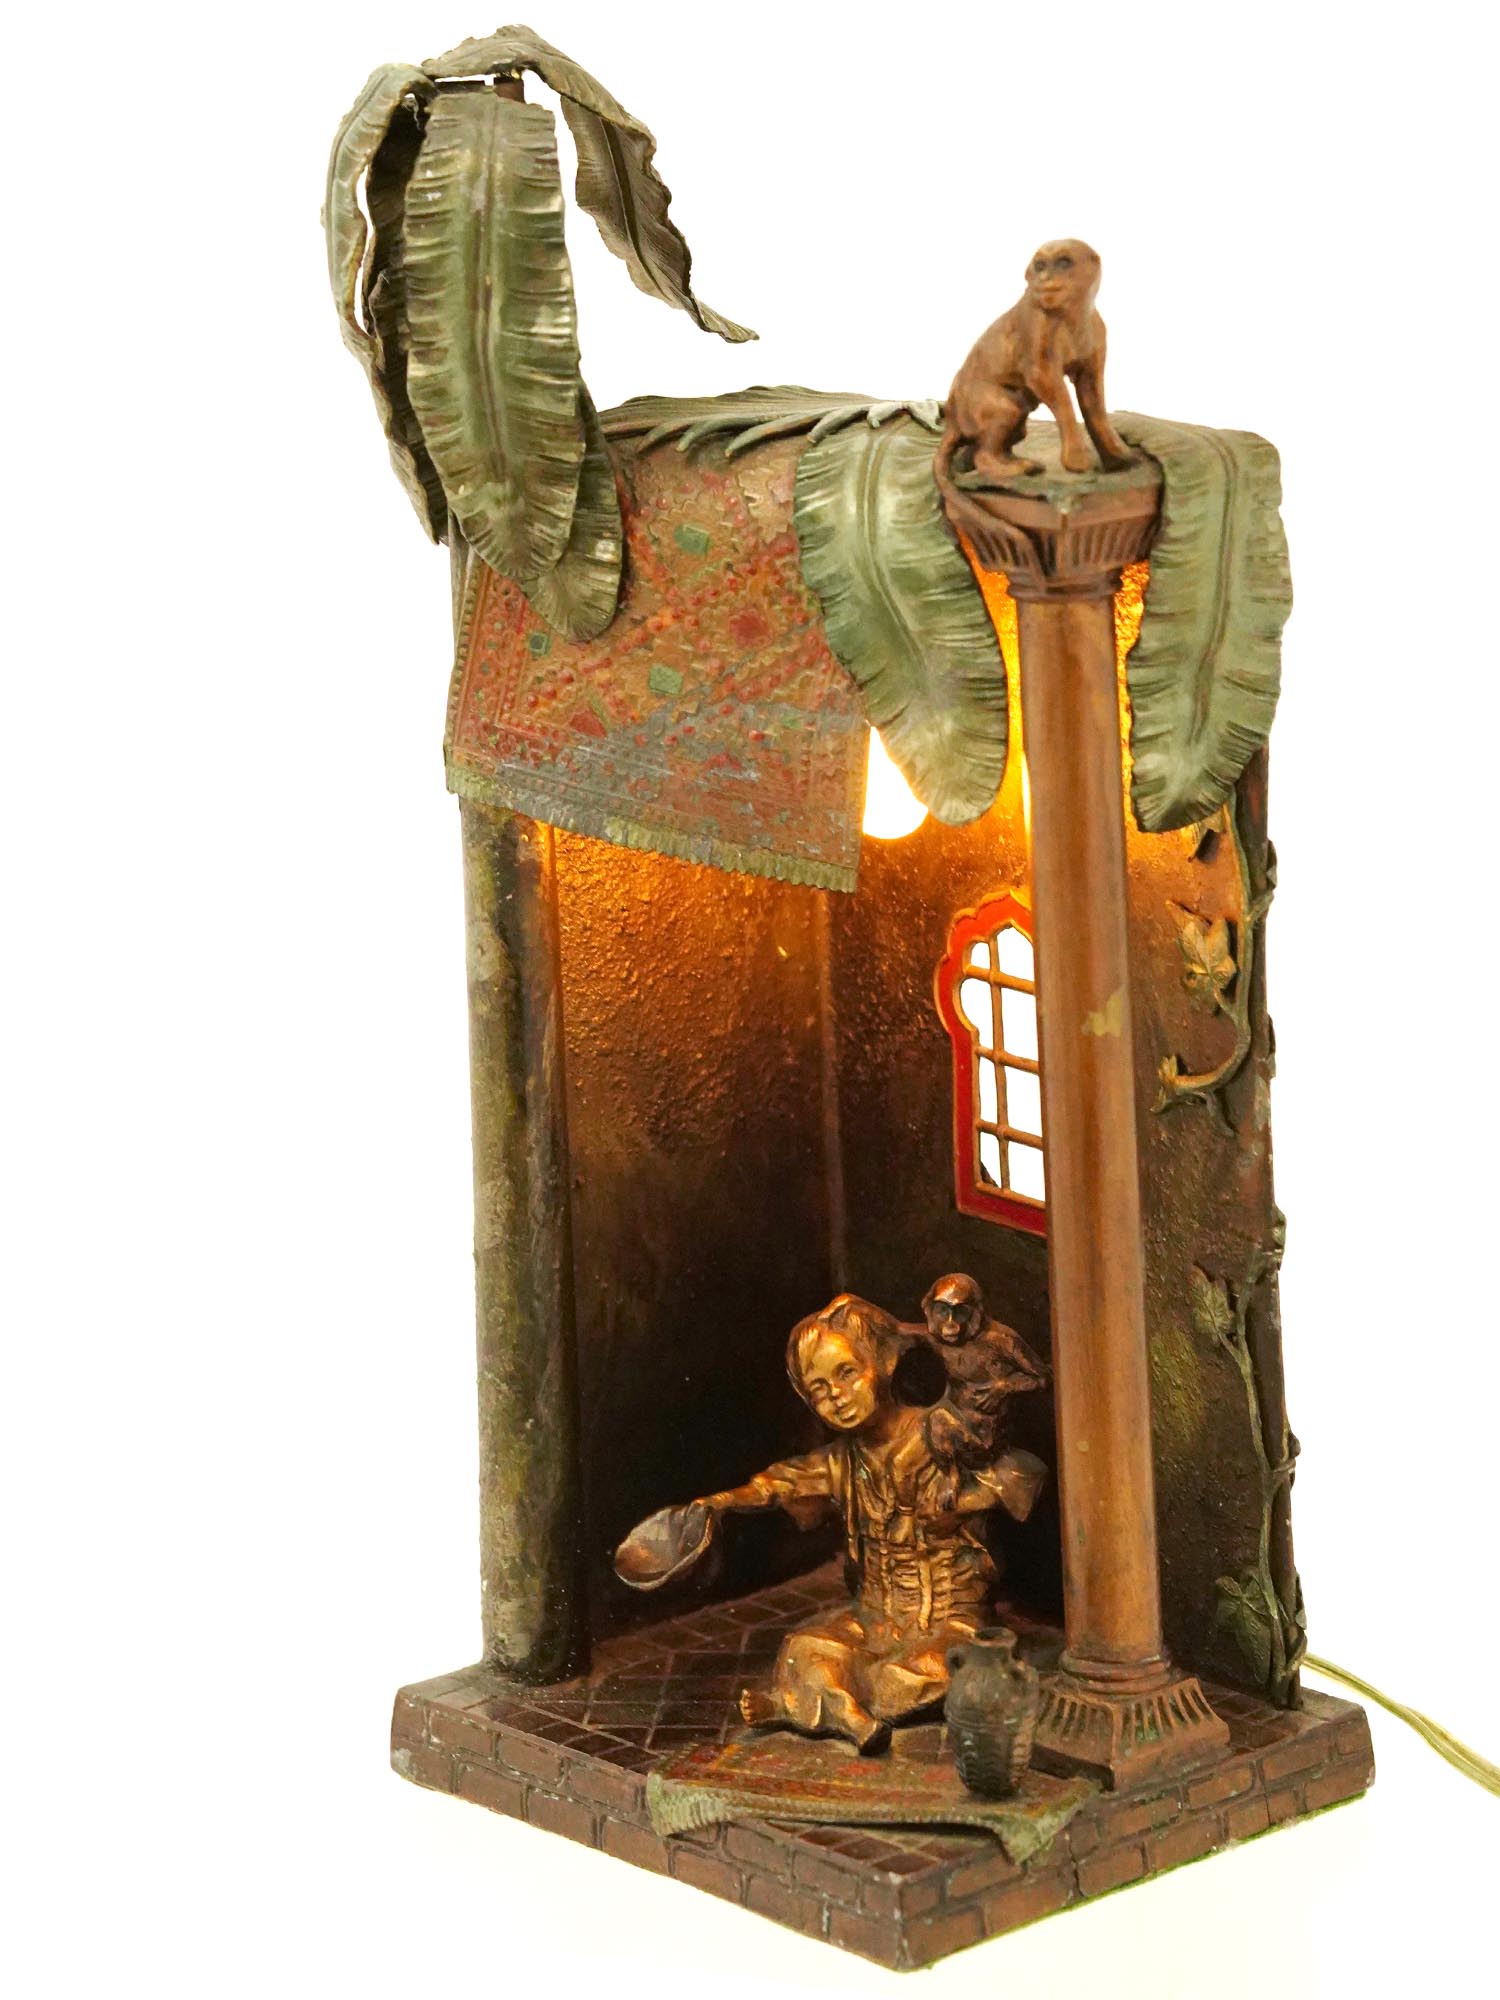 ANTIQUE AUSTRIAN BRONZE TABLE LAMP BOY WITH MONKEY PIC-0